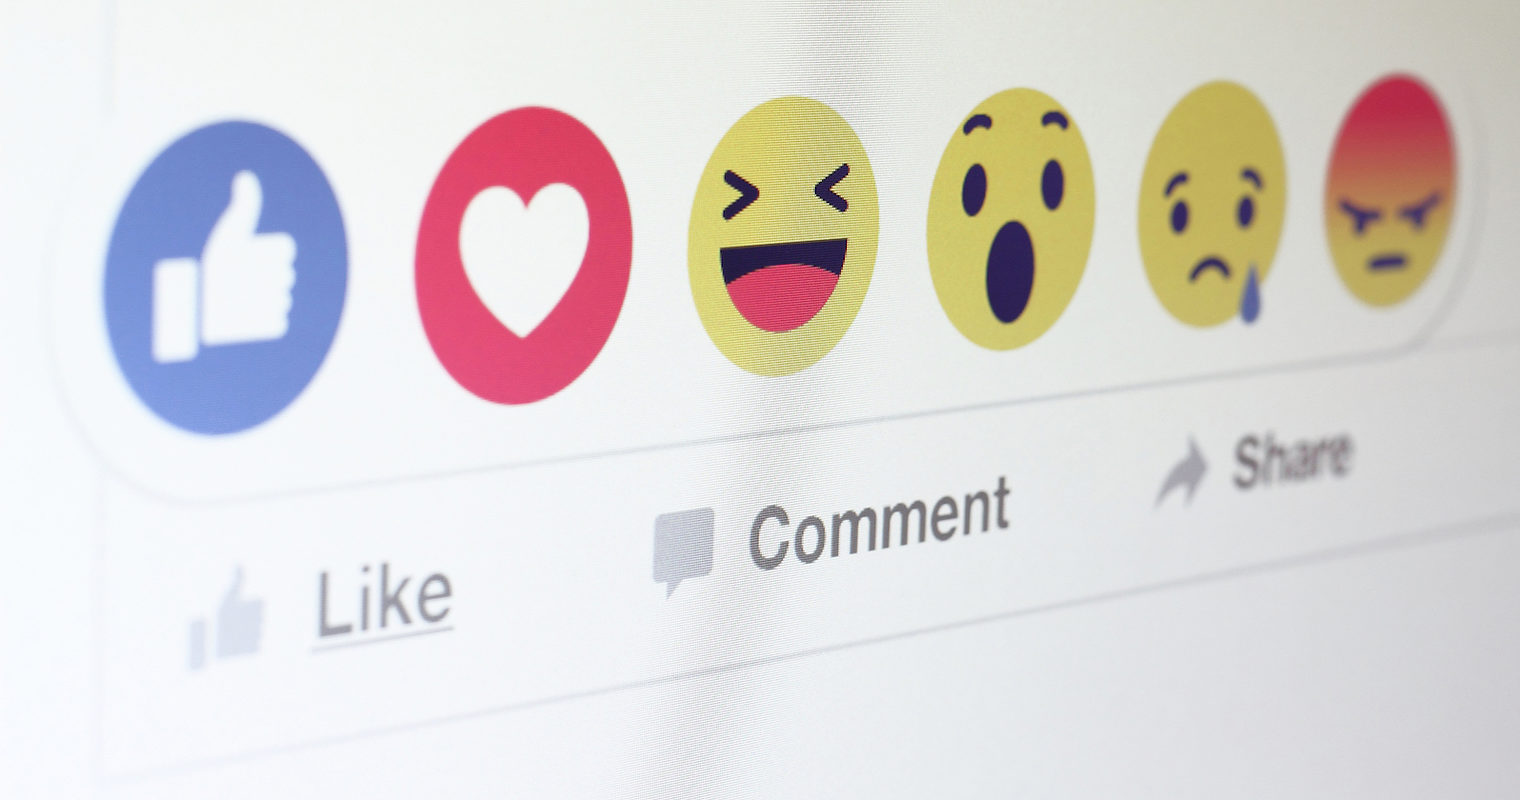 Facebook Reactions Now More Important Than Likes